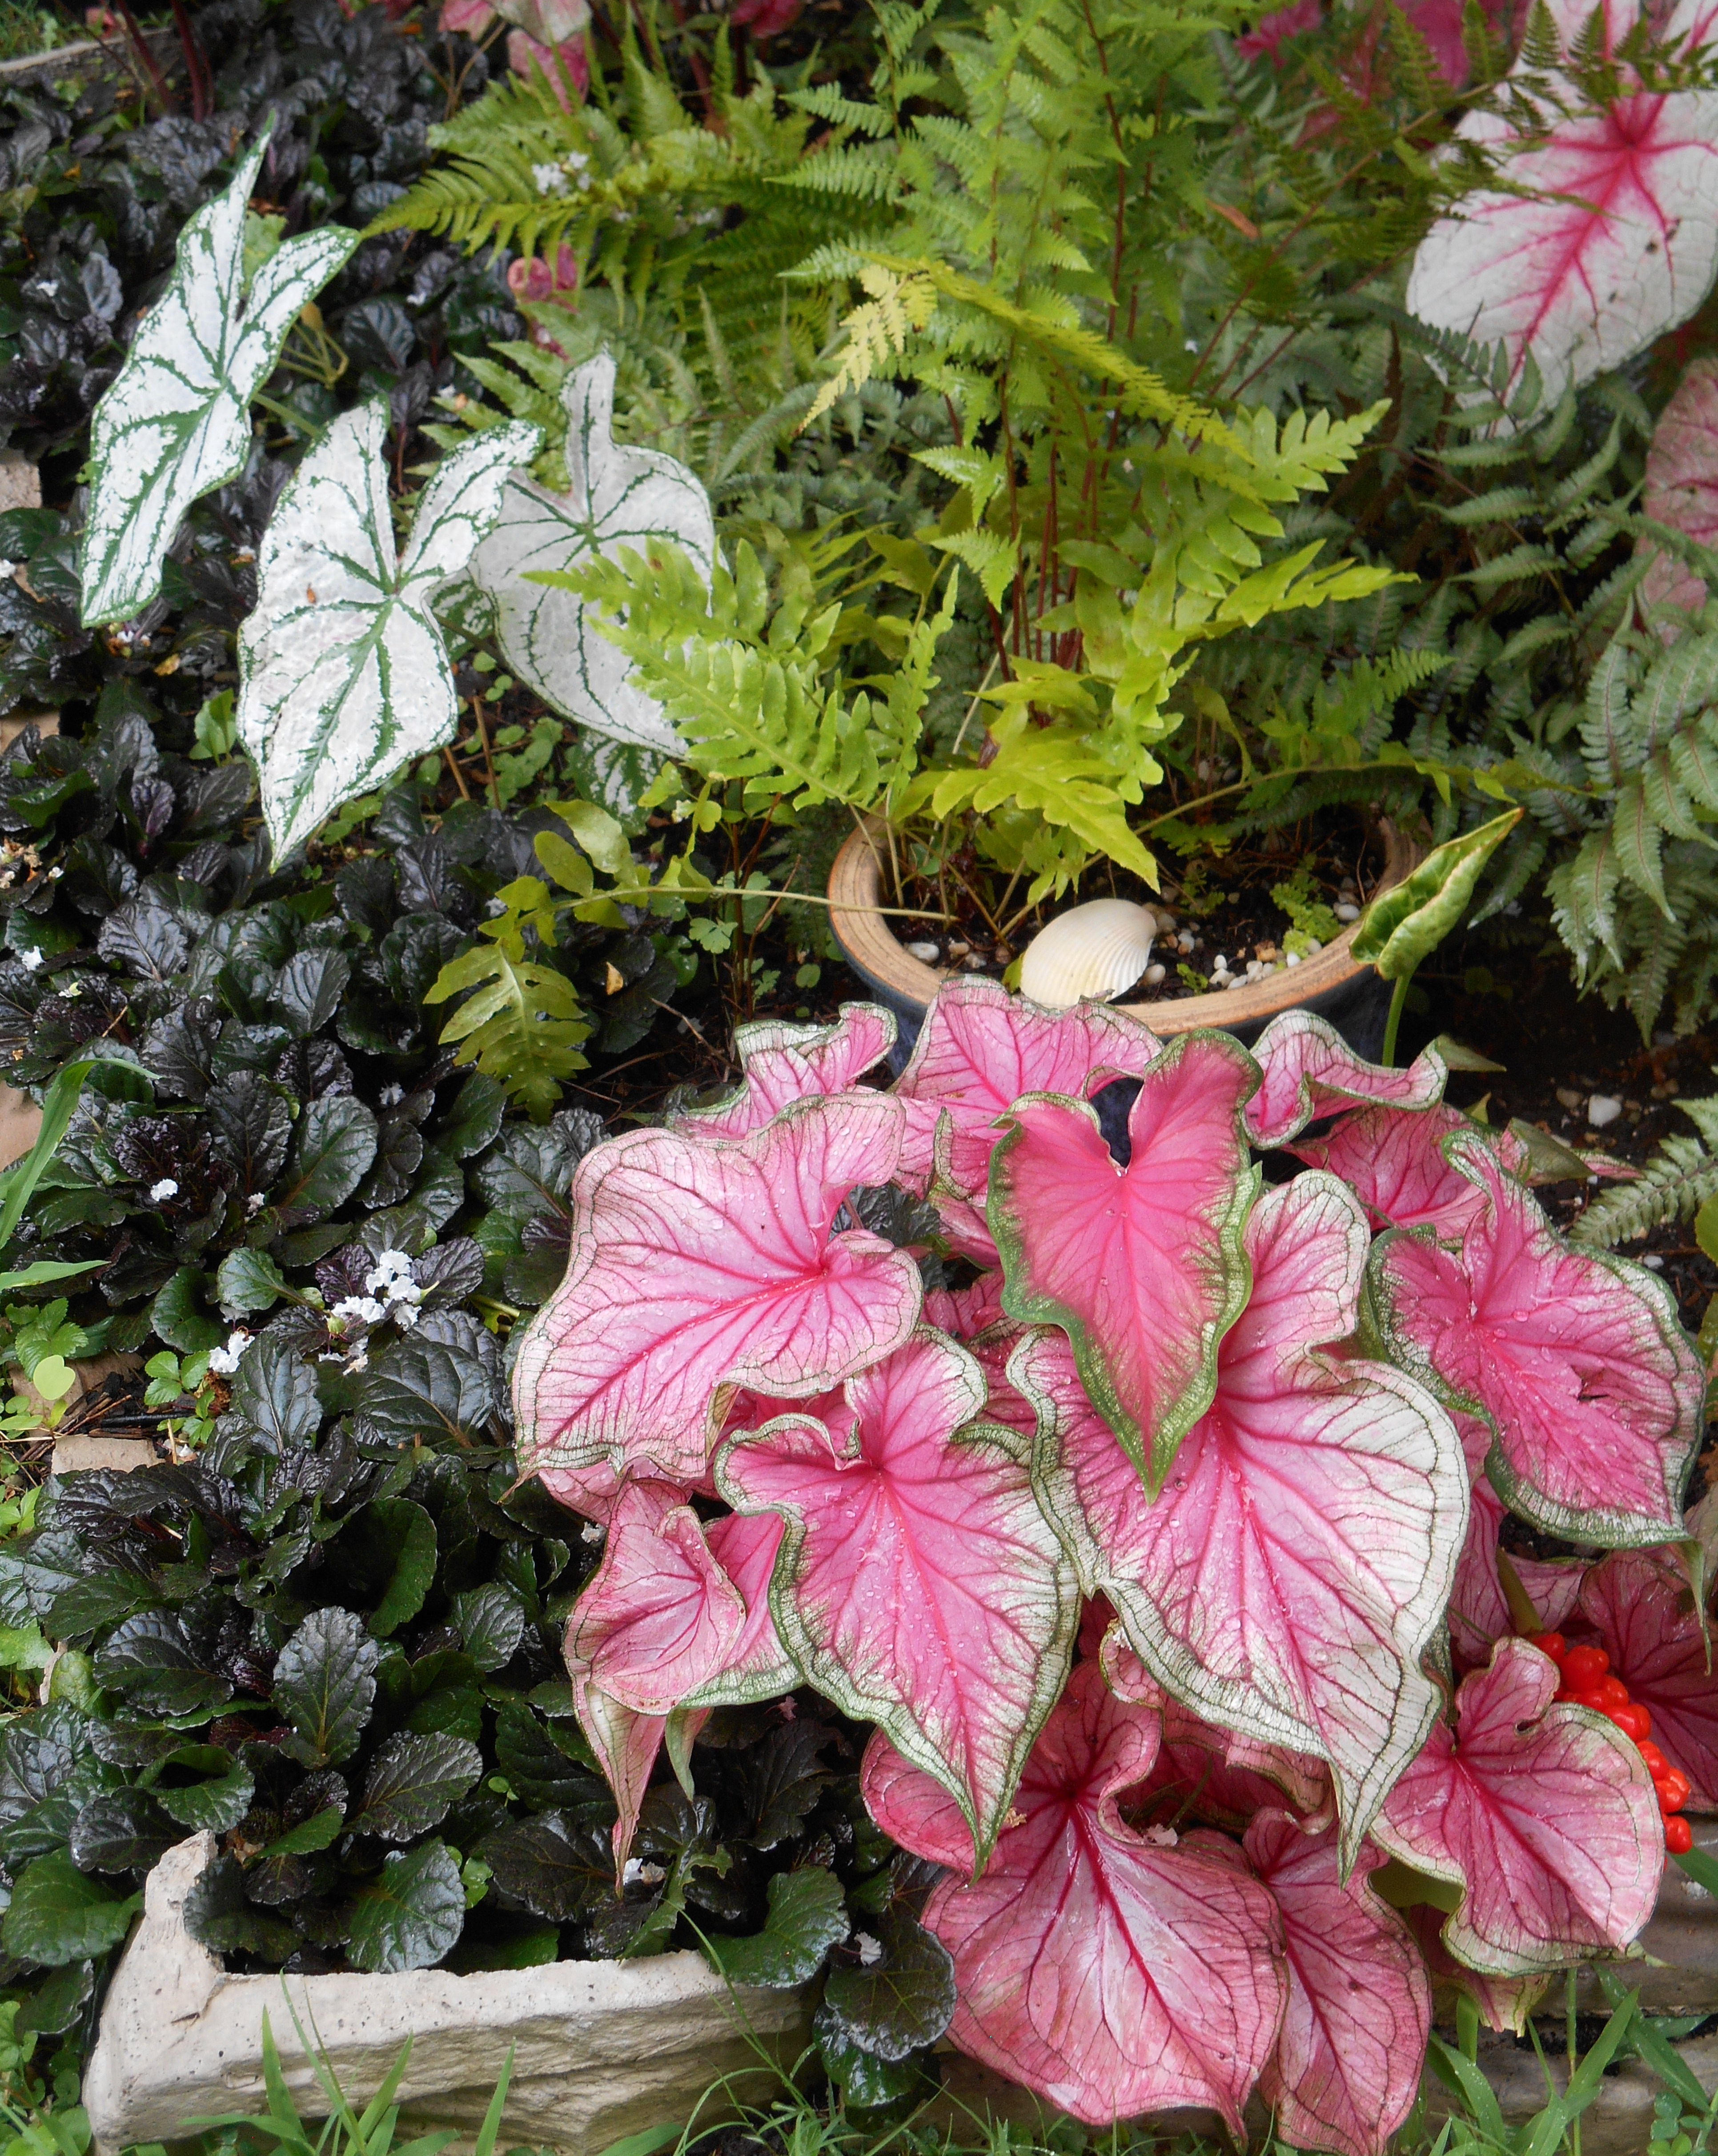 Ajuga reptans 'Black Scallop' proves a hardy and beautiful ground cover in pots and planting beds. Evergreen, it blooms each spring. Caladiums love our summer weather!